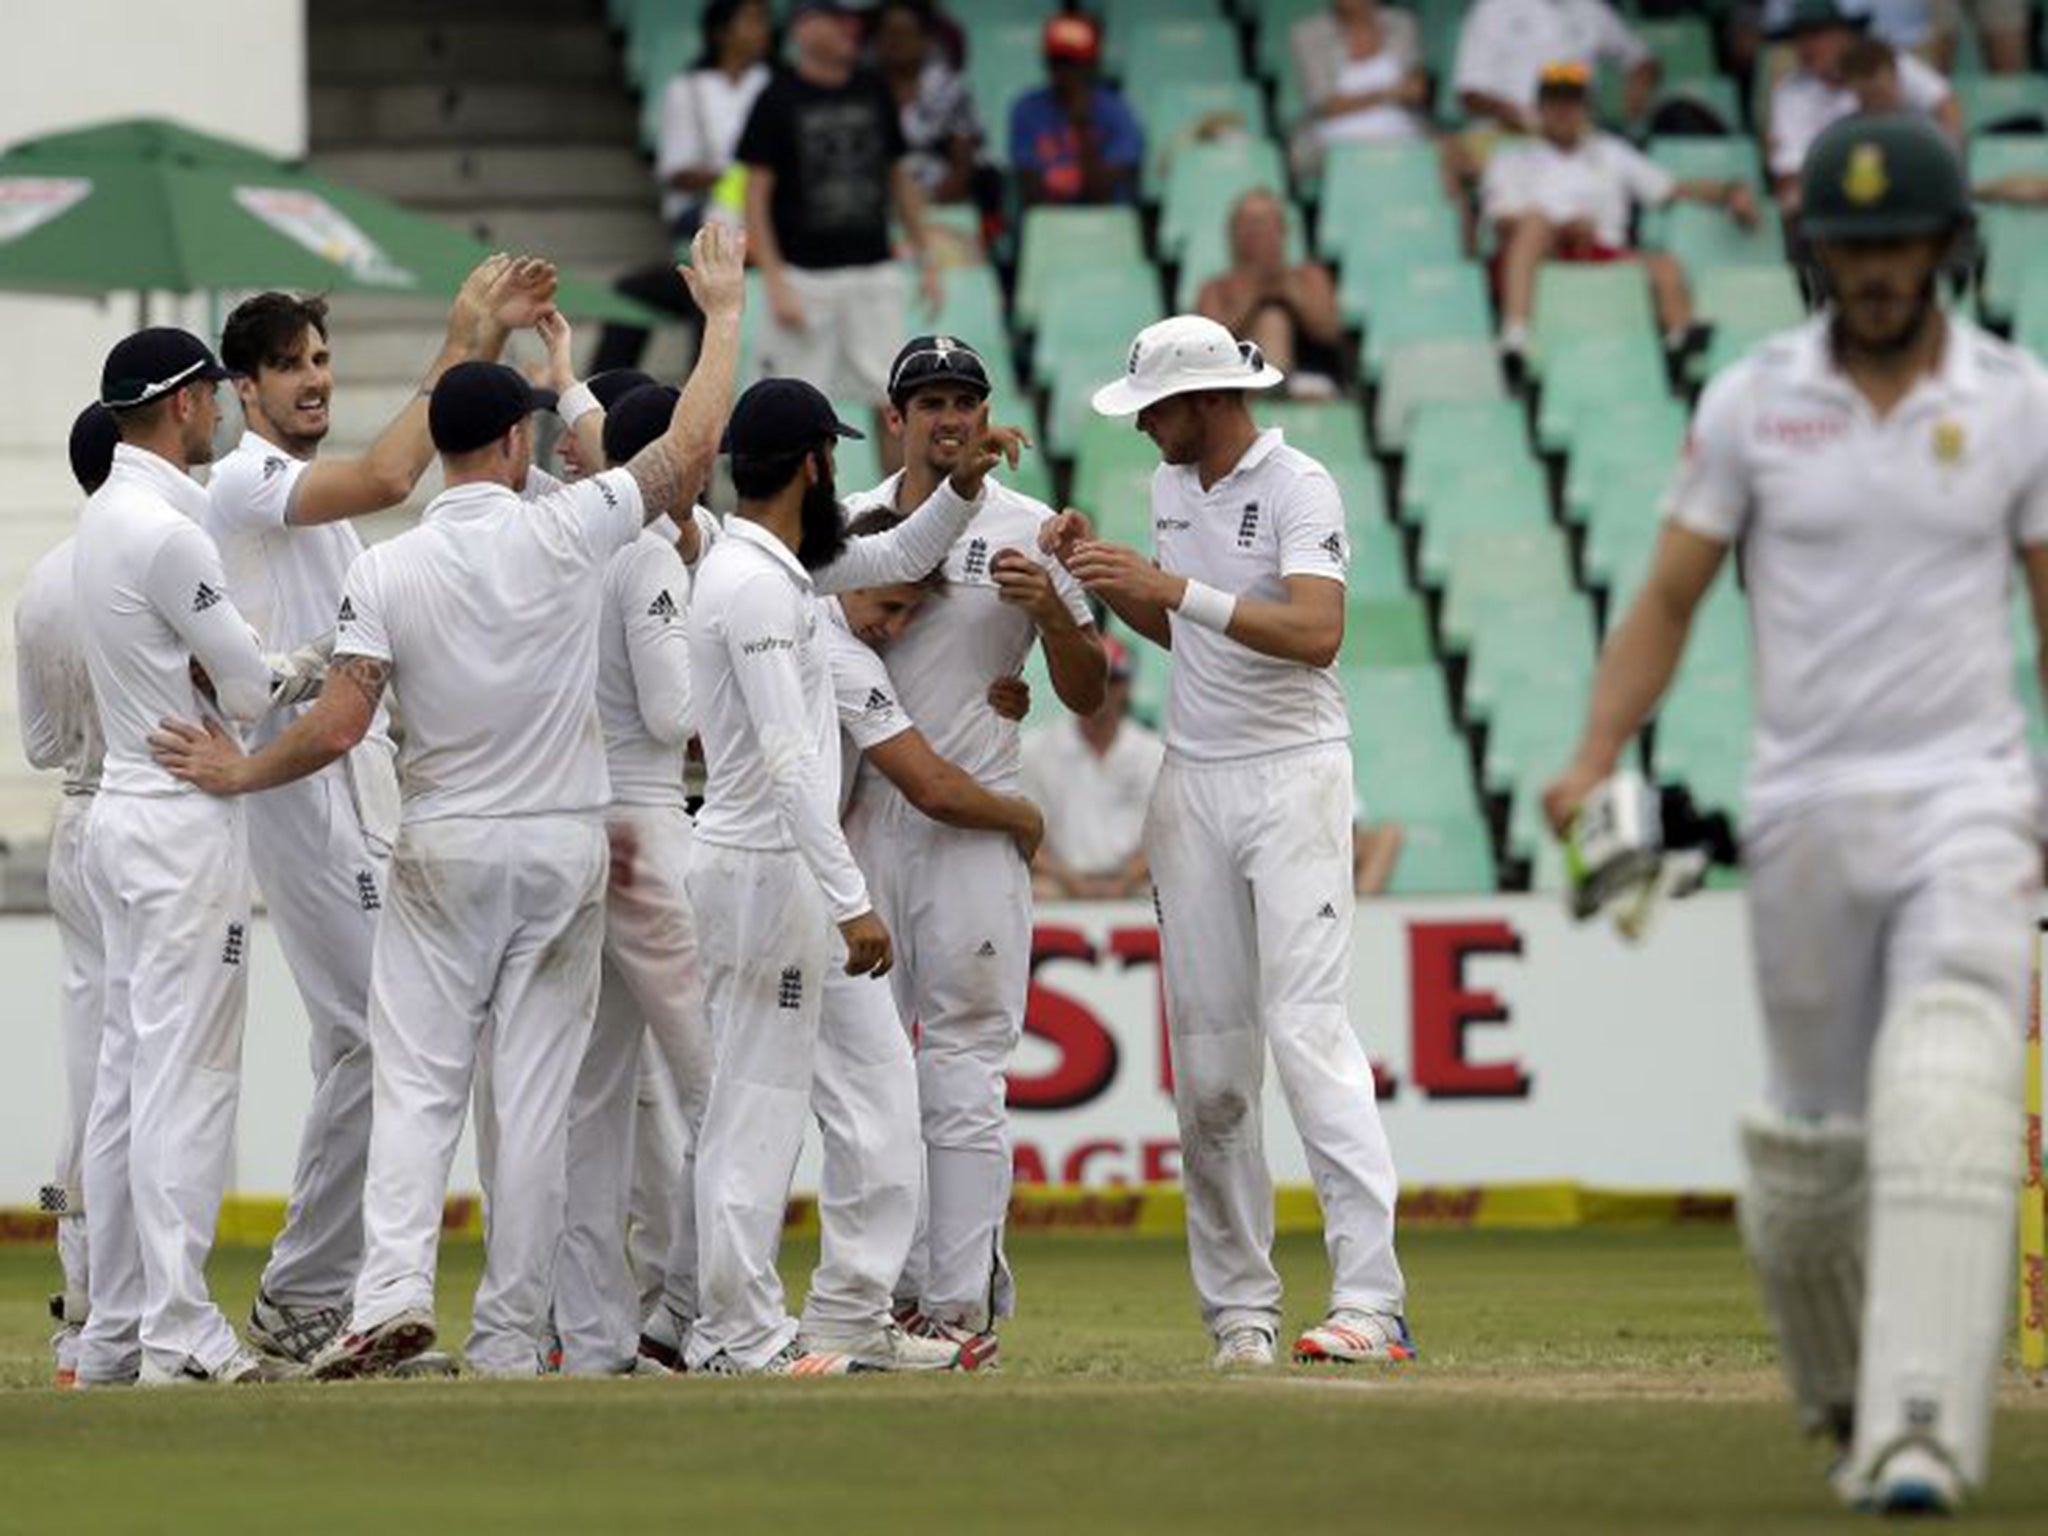 Steve Finn (second from left) celebrates after having South Africa batsman Faf du Plessis caught in the slips at the end of the day’s play